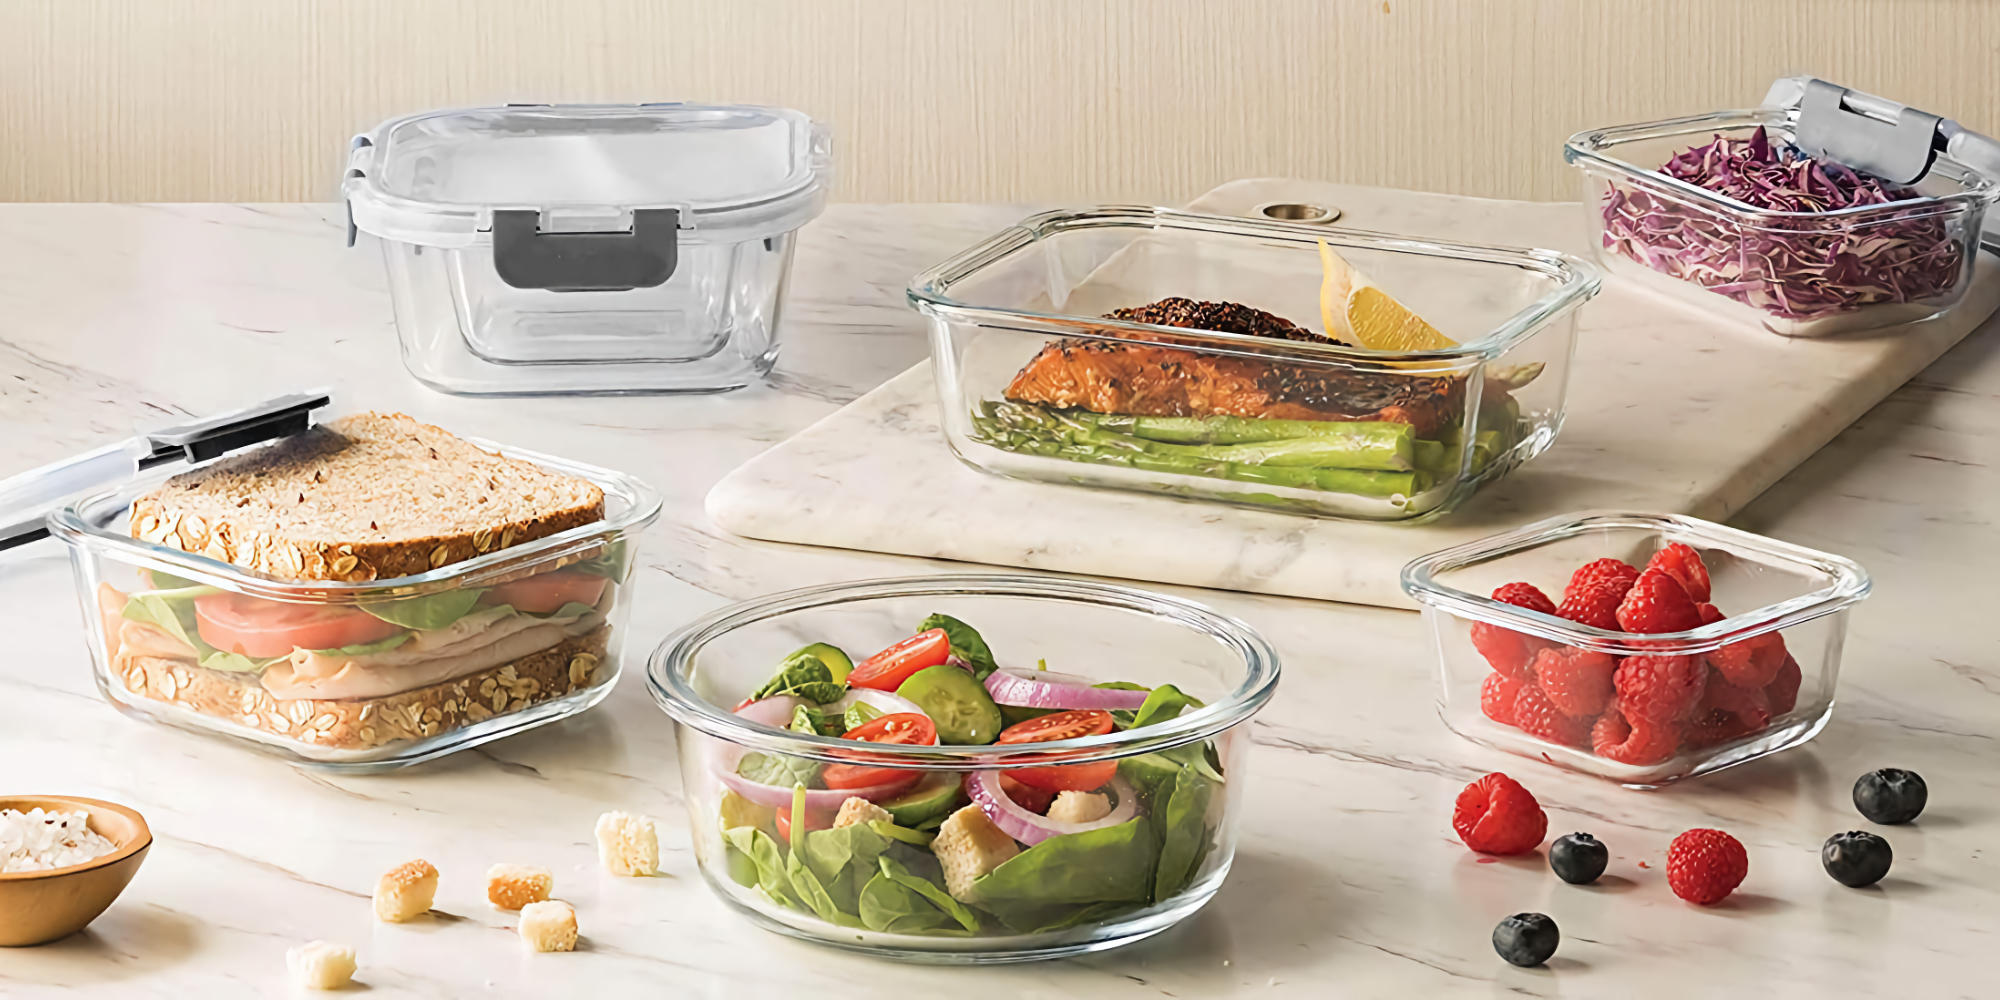 https://9to5toys.com/wp-content/uploads/sites/5/2021/08/FineDine-24-Piece-Glass-Food-Storage-Container-Set.jpg